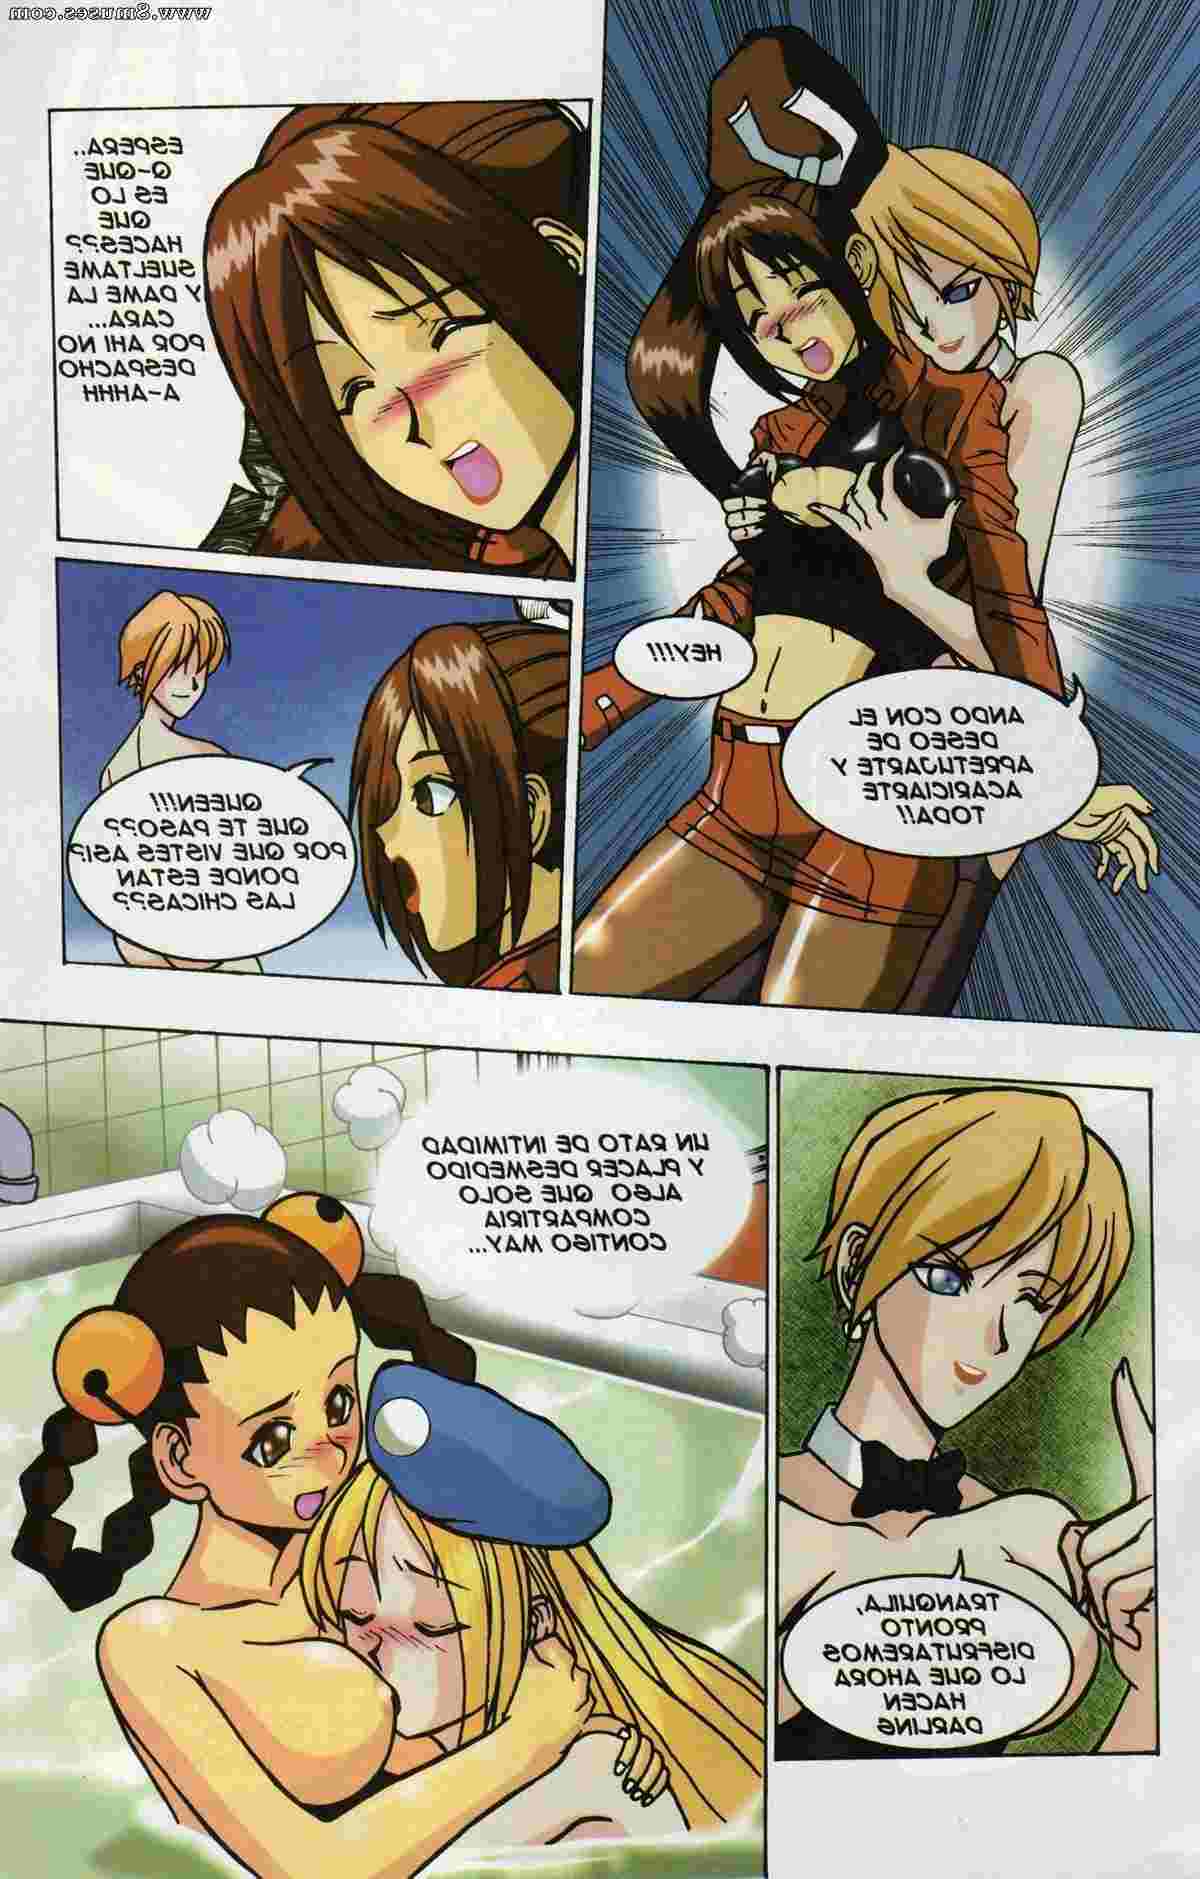 Parodias-3x-Comics/The-Queen-of-Fighters The_Queen_of_Fighters__8muses_-_Sex_and_Porn_Comics_8.jpg